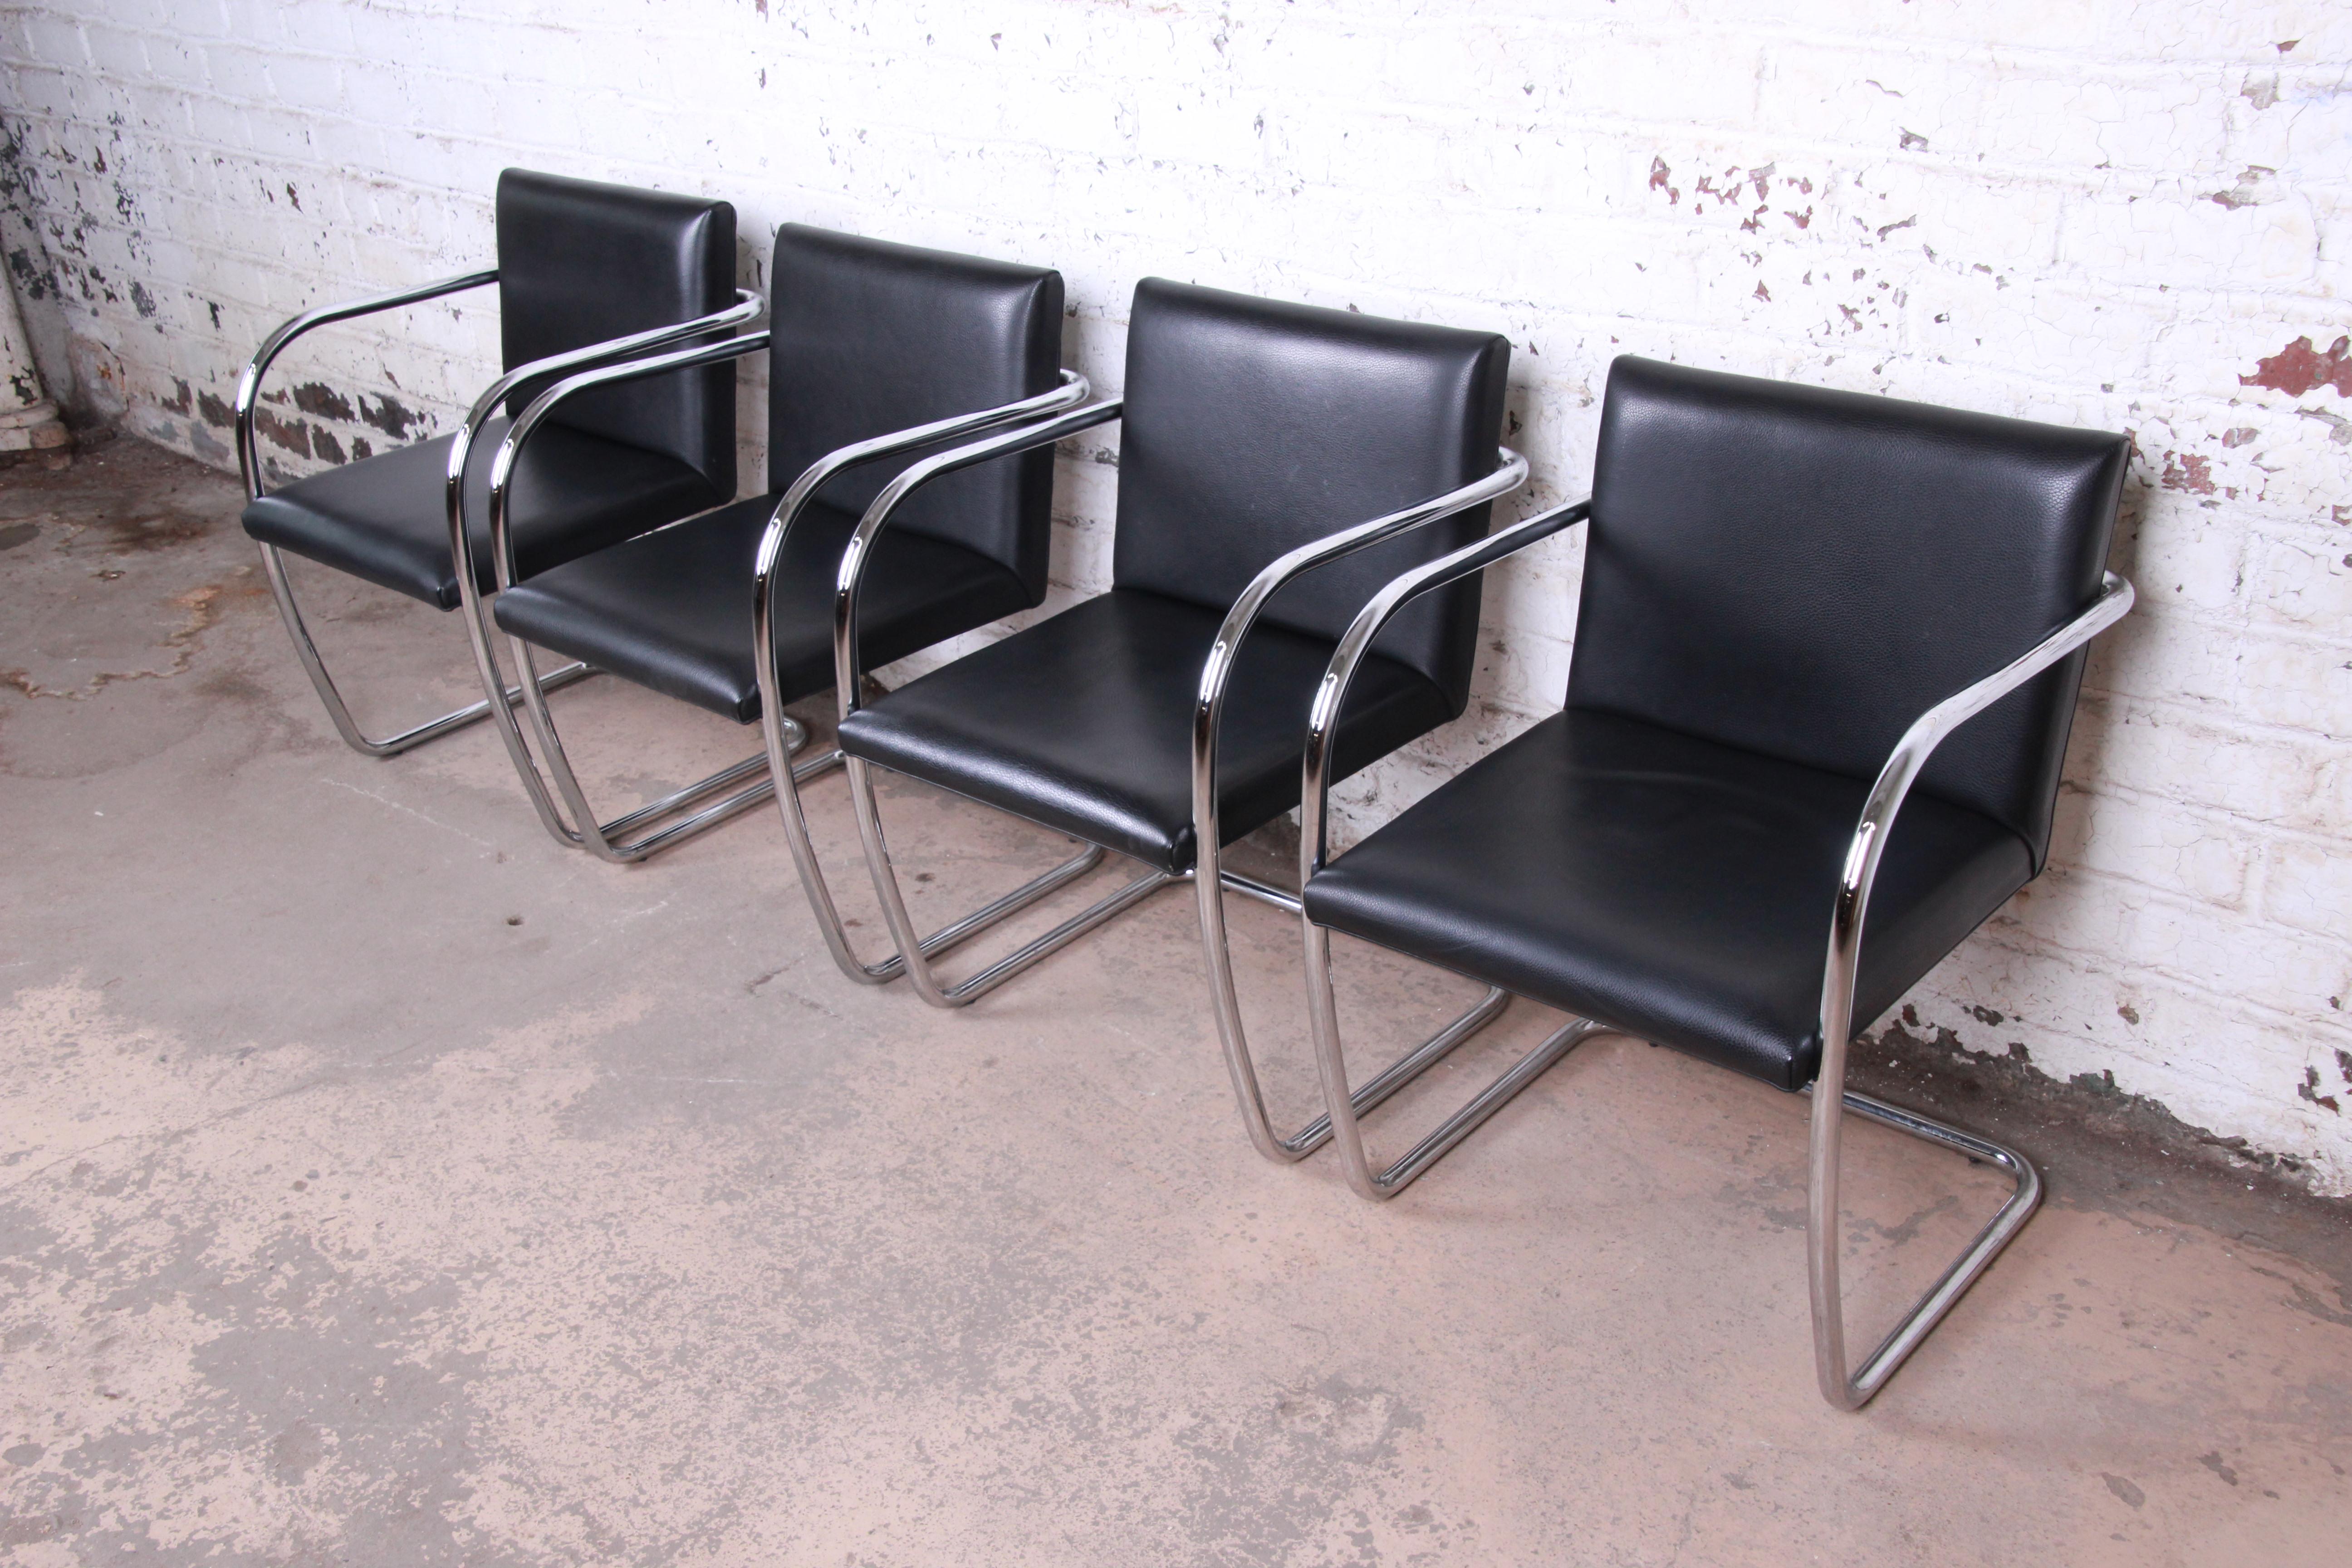 Italian Mies van der Rohe Black Leather and Chrome Brno Chairs, Made in Italy